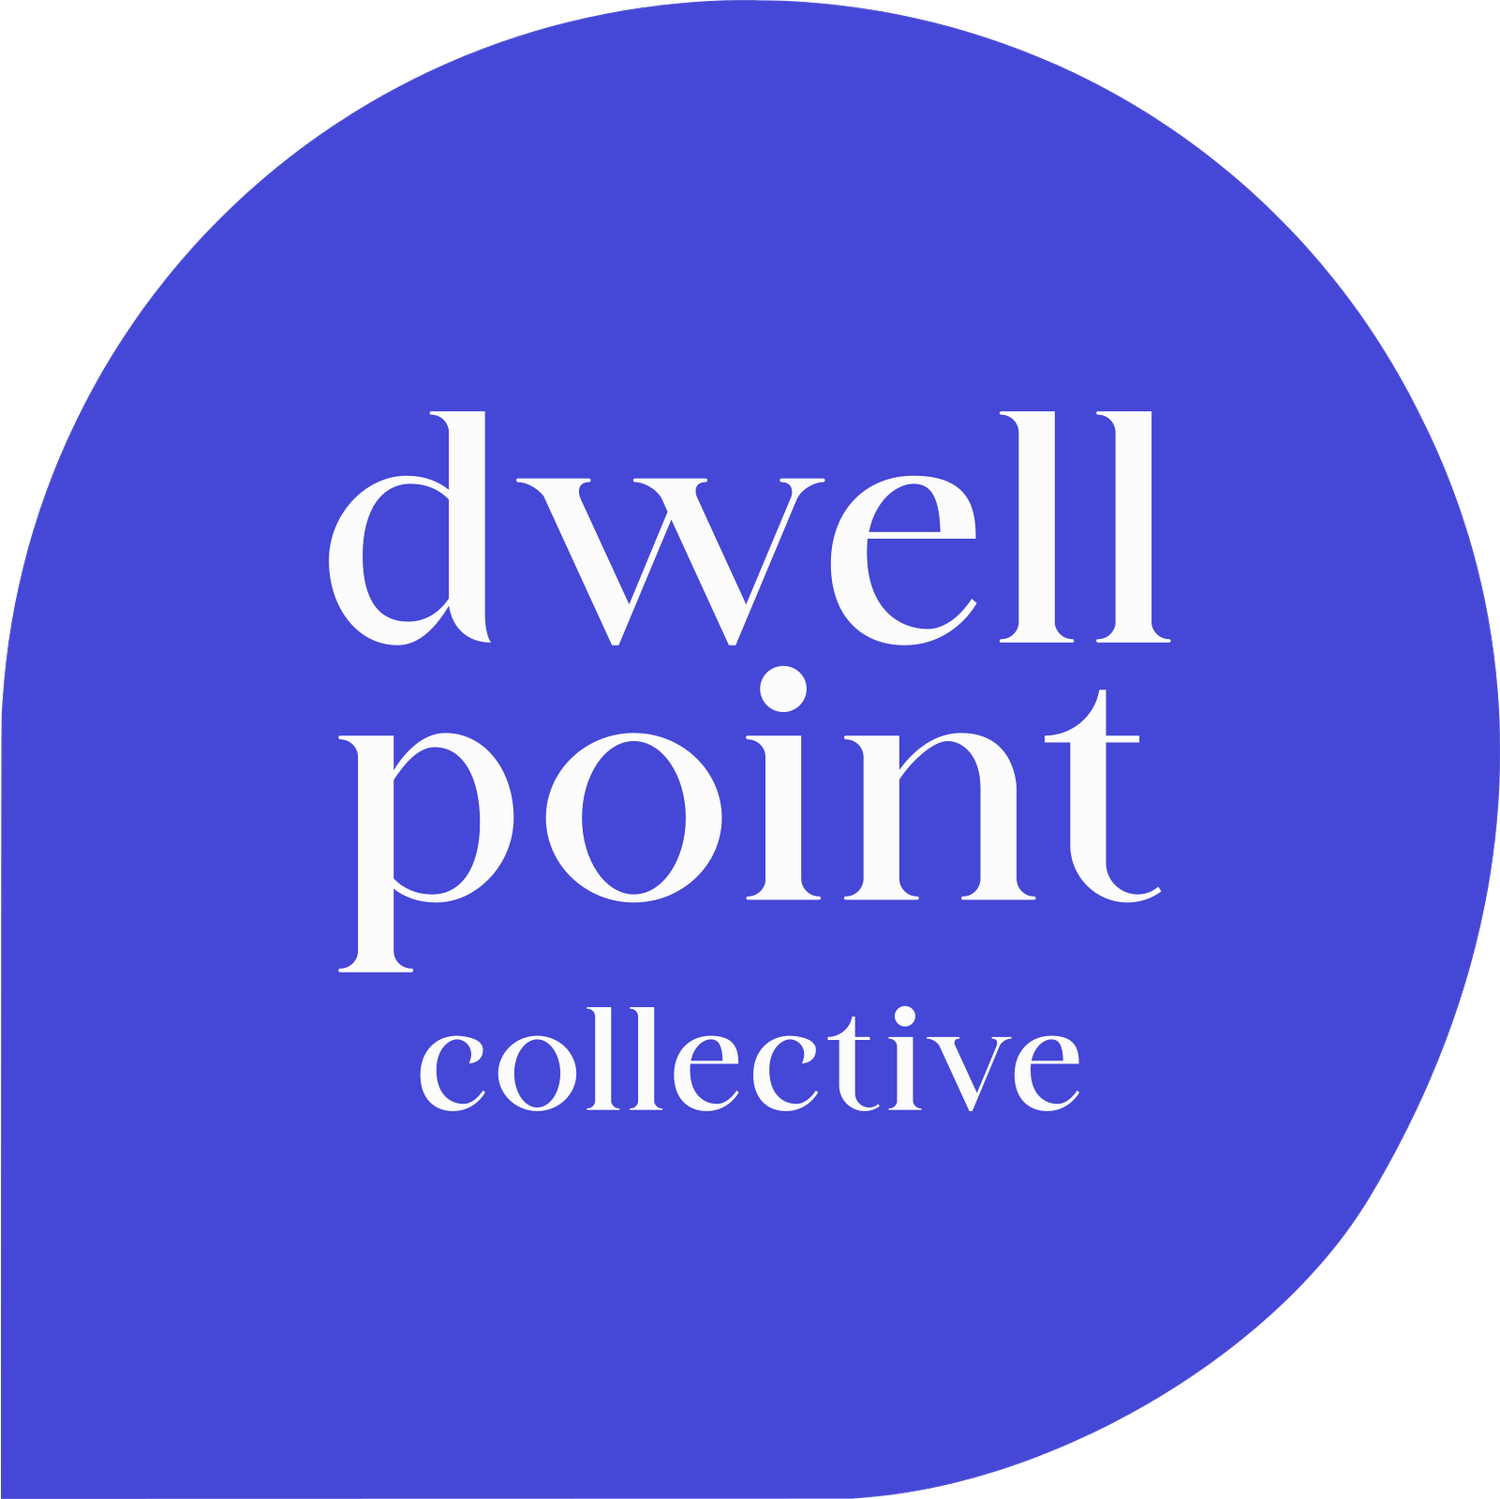 DWELL POINT COLLECTIVE